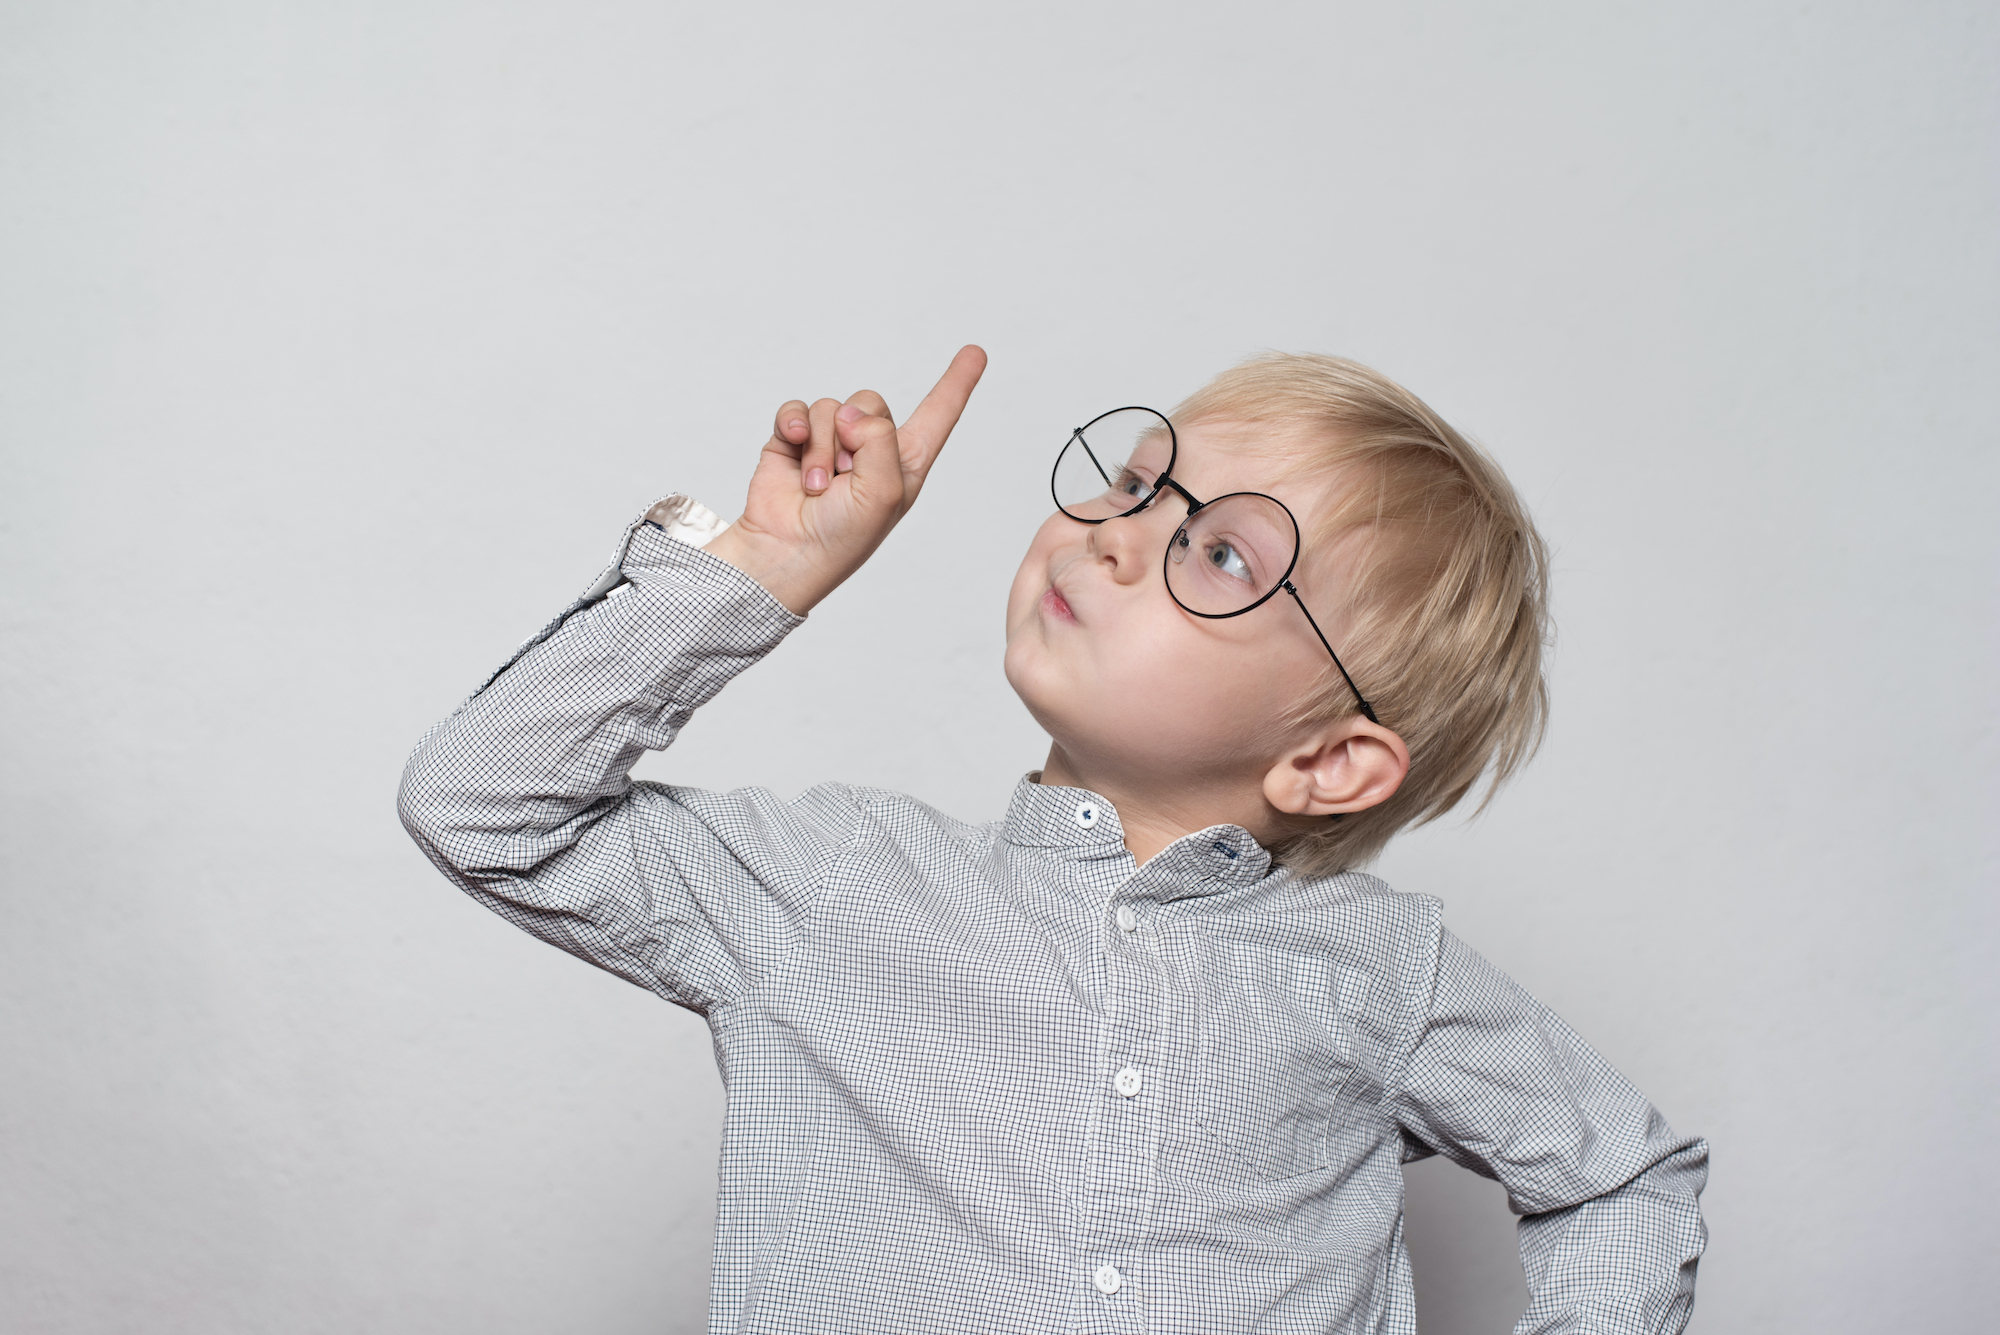 Portrait of a cute blond boy with big glasses. Finger pointing up. White background.